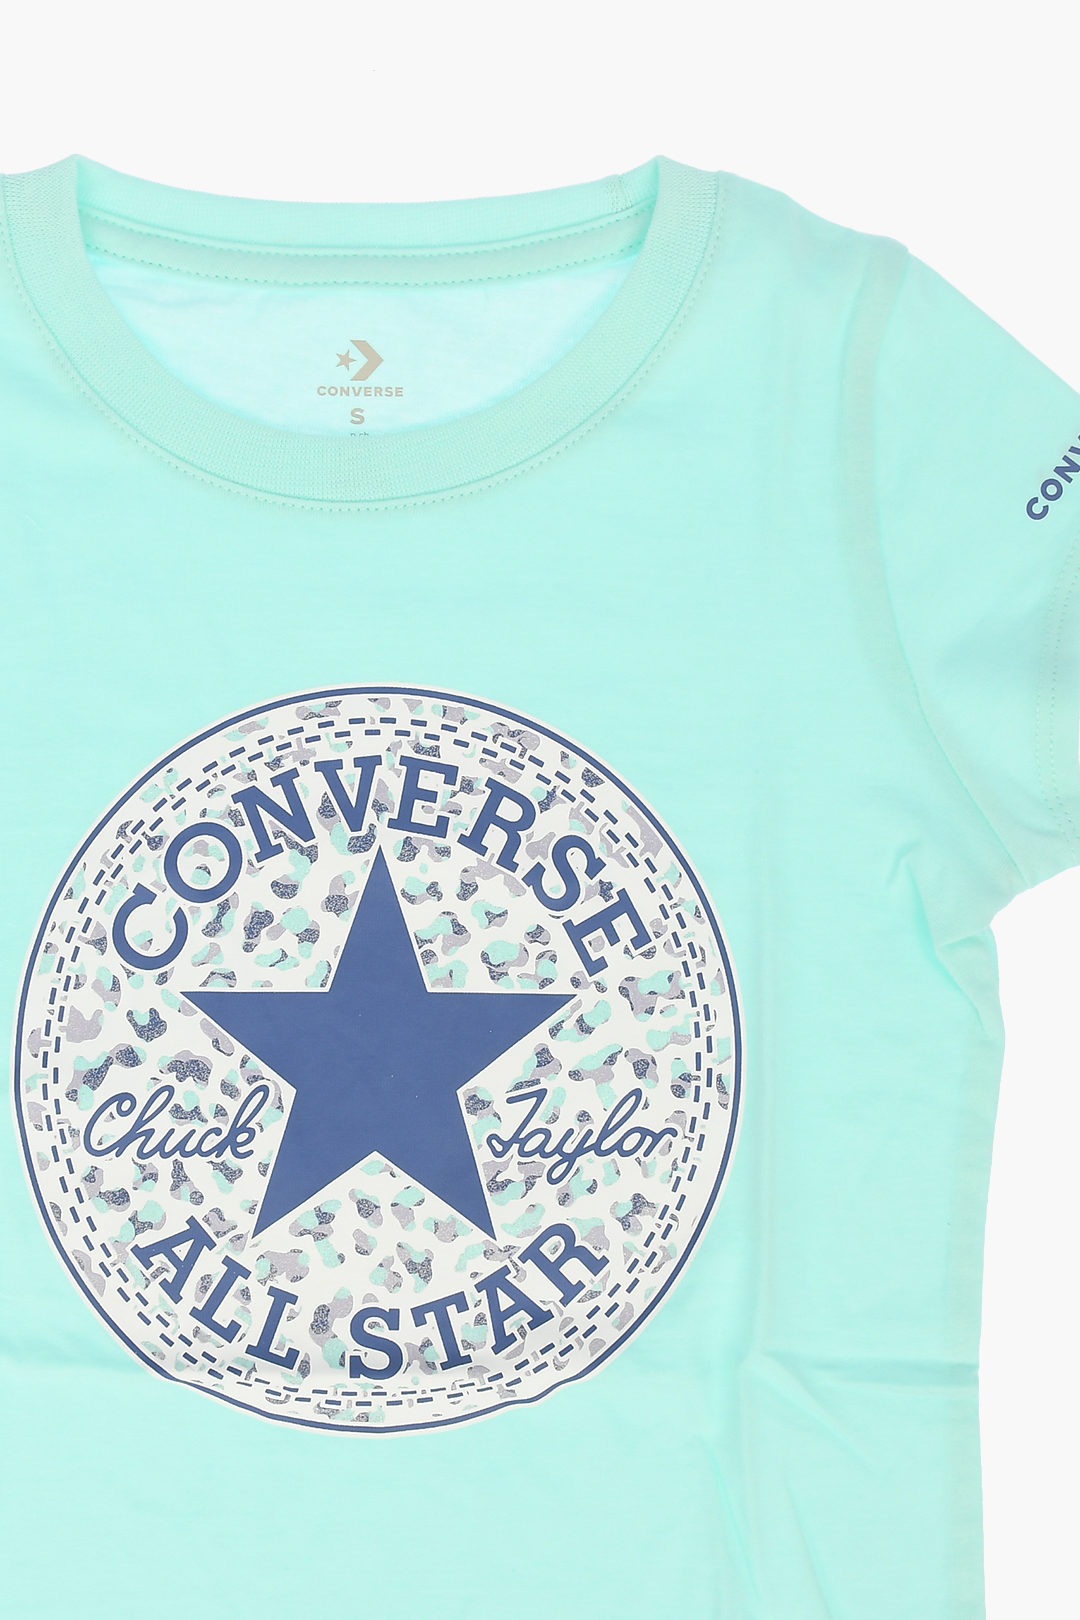 Converse KIDS ALL STAR CHUCK TAYLOR Printed T-shirt girls - Glamood Outlet